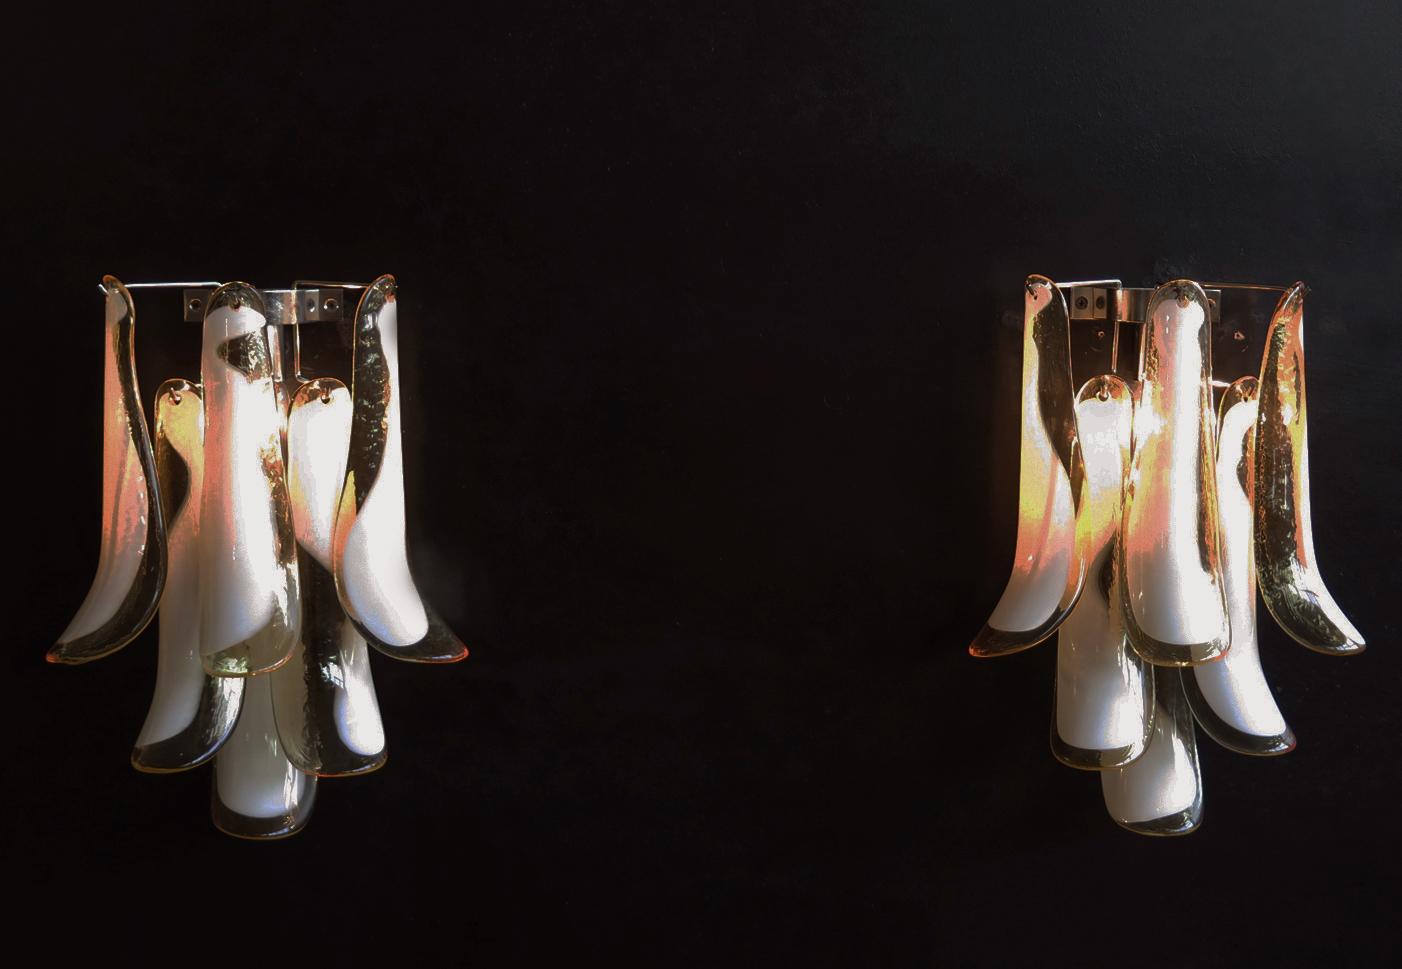 Pair of vintage Italian Murano appliques. Wall lights have 6 caramel and lattimo glass petals (for each applique) in a chrome frame.
Period: 1970's
Dimensions: 17,30 inches (44 cm) height; 13 inches (33 cm) width; 7,10 inches (18 cm) depth from